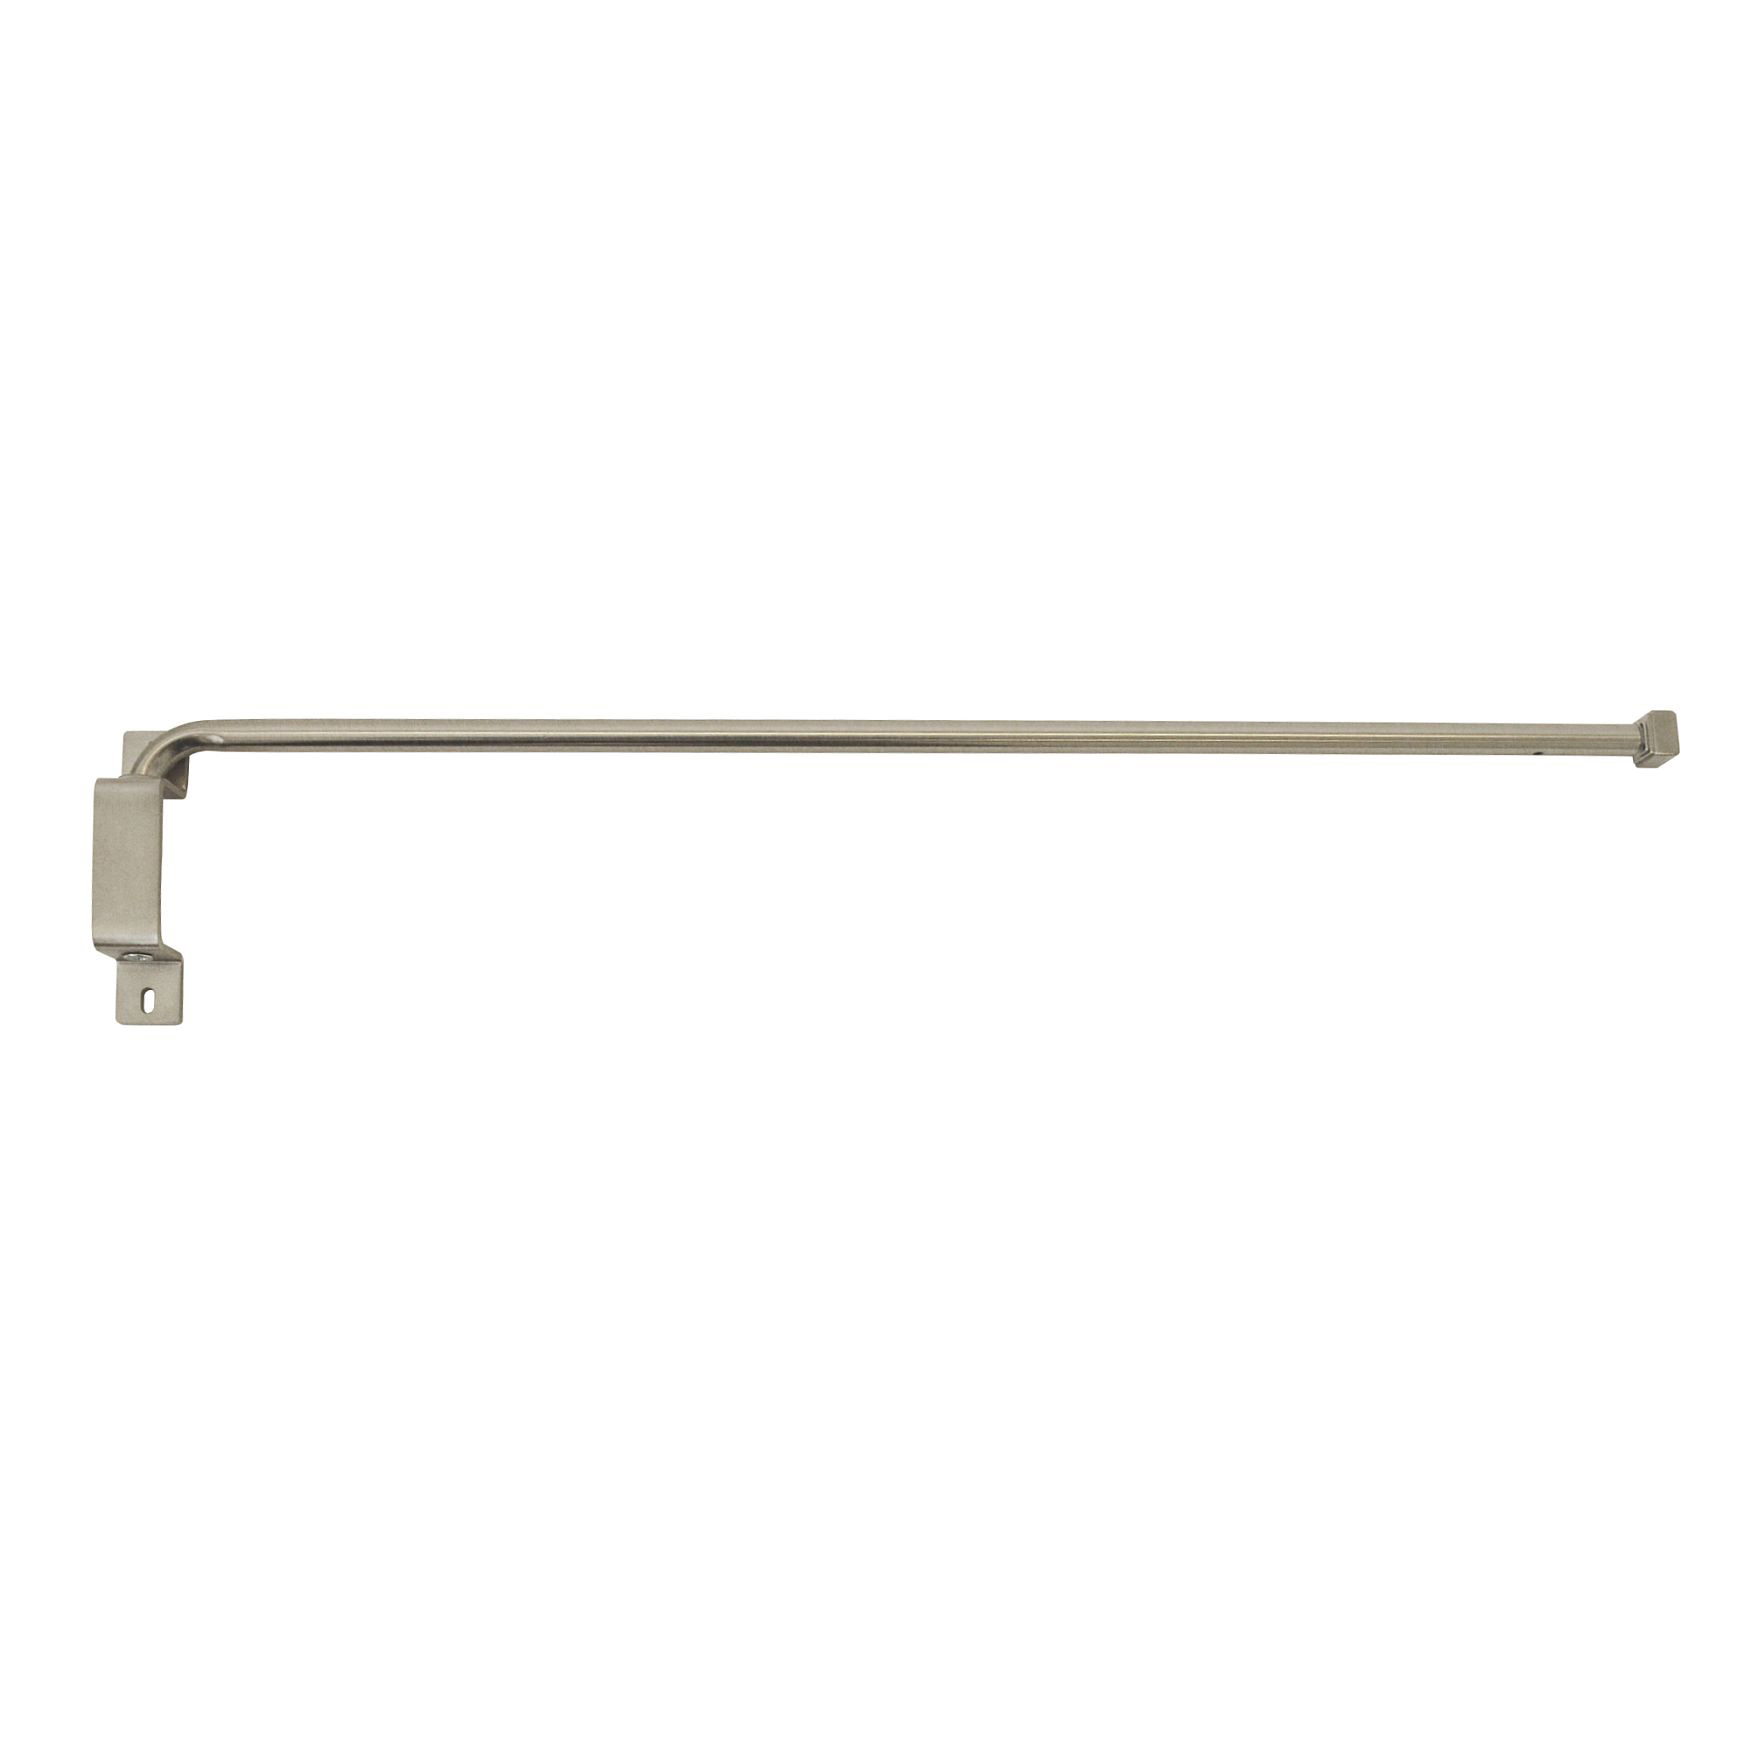 Innovative Swing Arm Curtain Rod - Brent 20-36, BRUSHED NICKEL